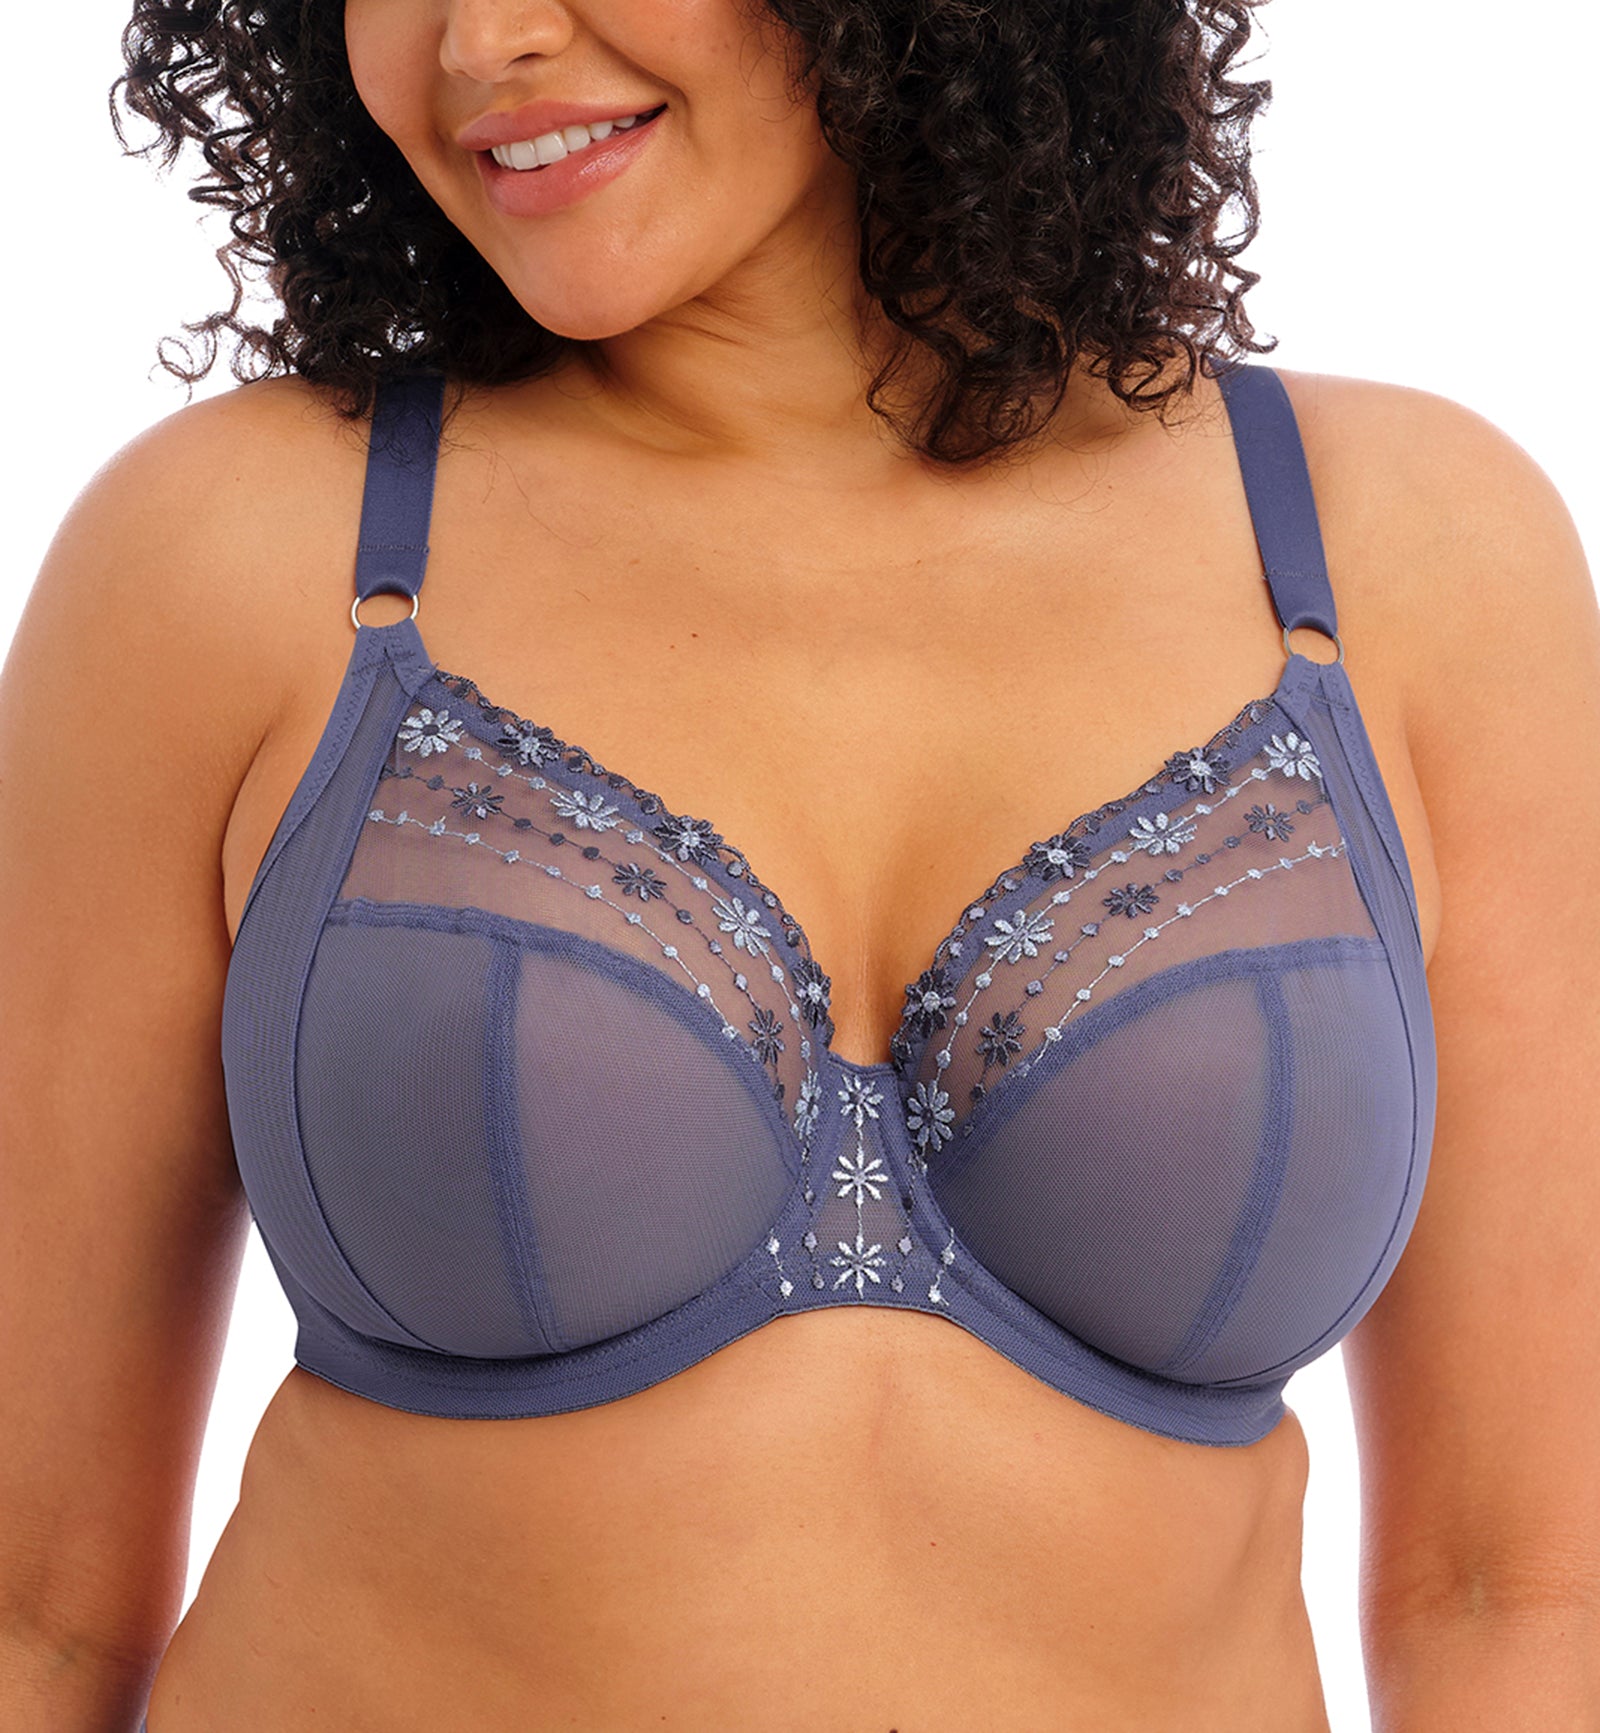 Full Busted Figure Types in 36DD Bra Size Clove Convertible Bras